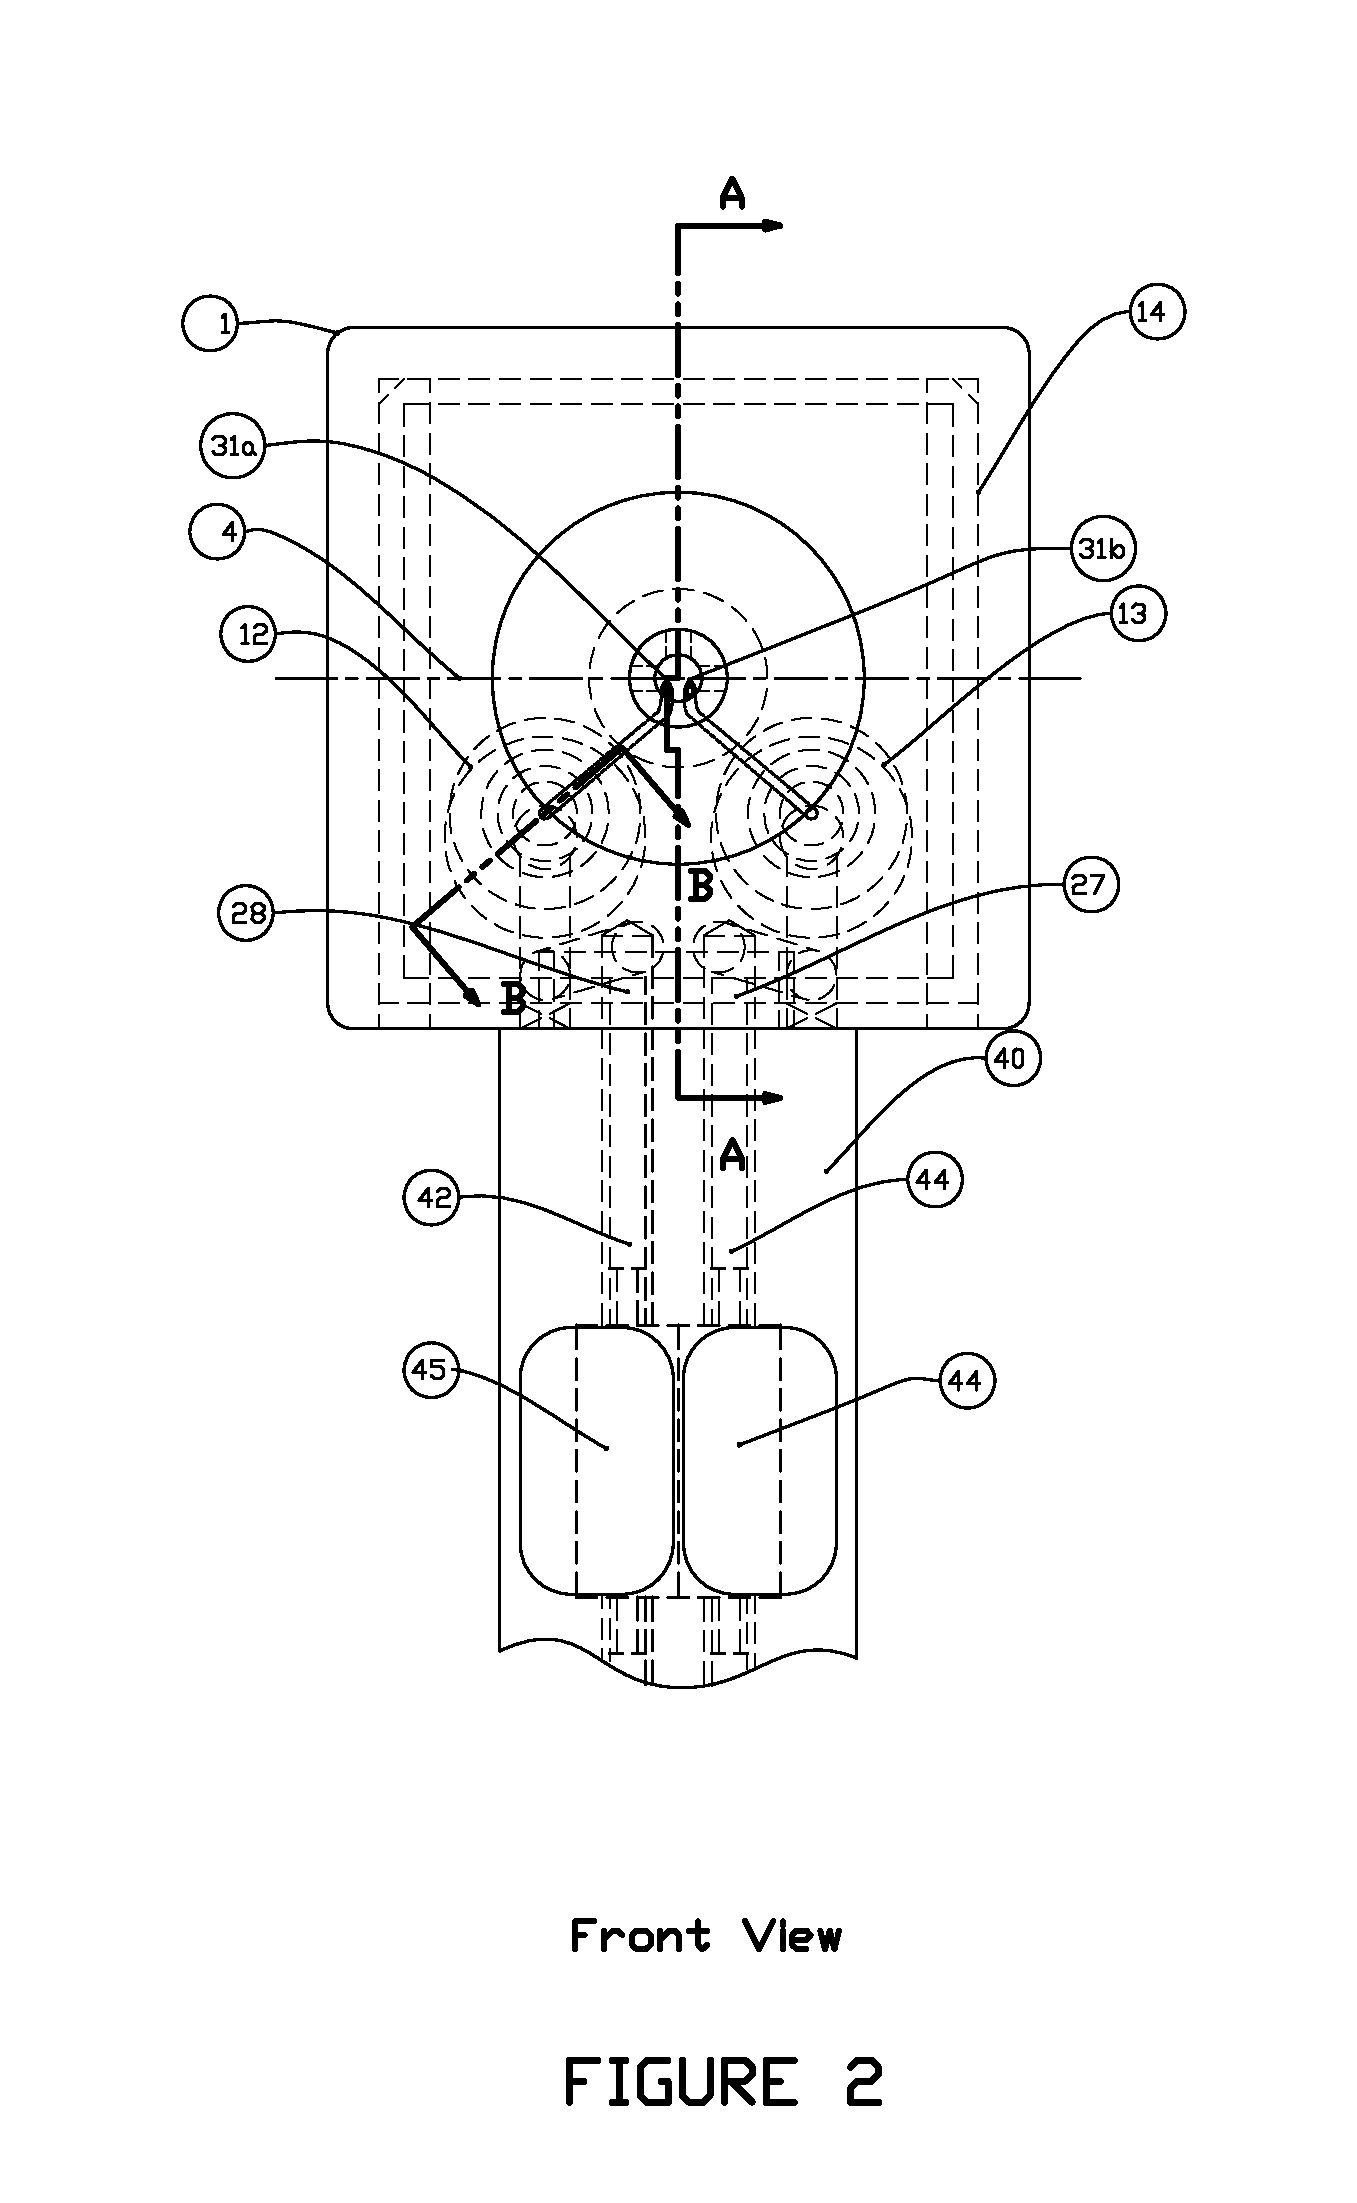 Device and method for delivering medicine into the tympanic cavity